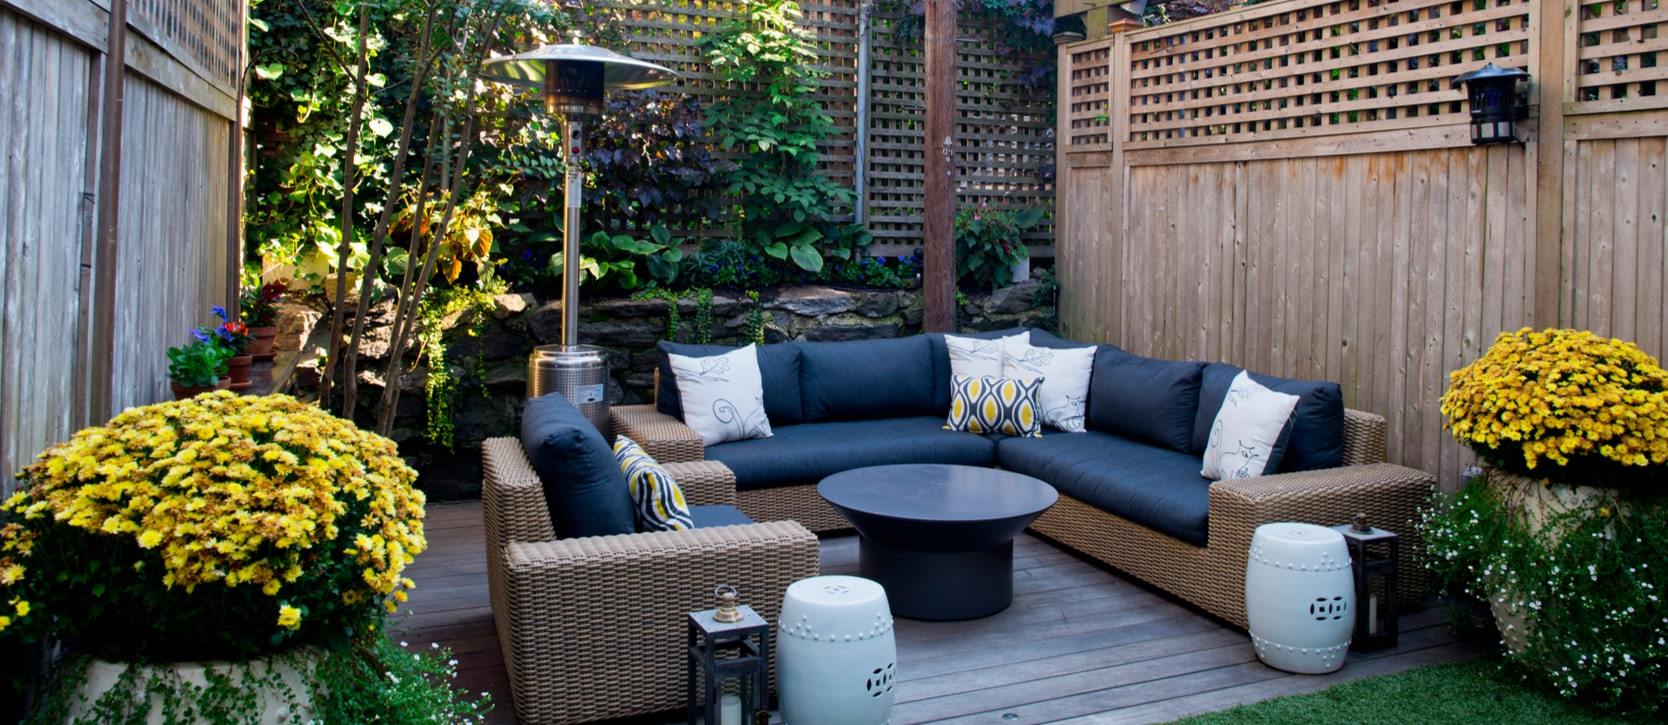 Beautiful backyard space with decor including couches and plants